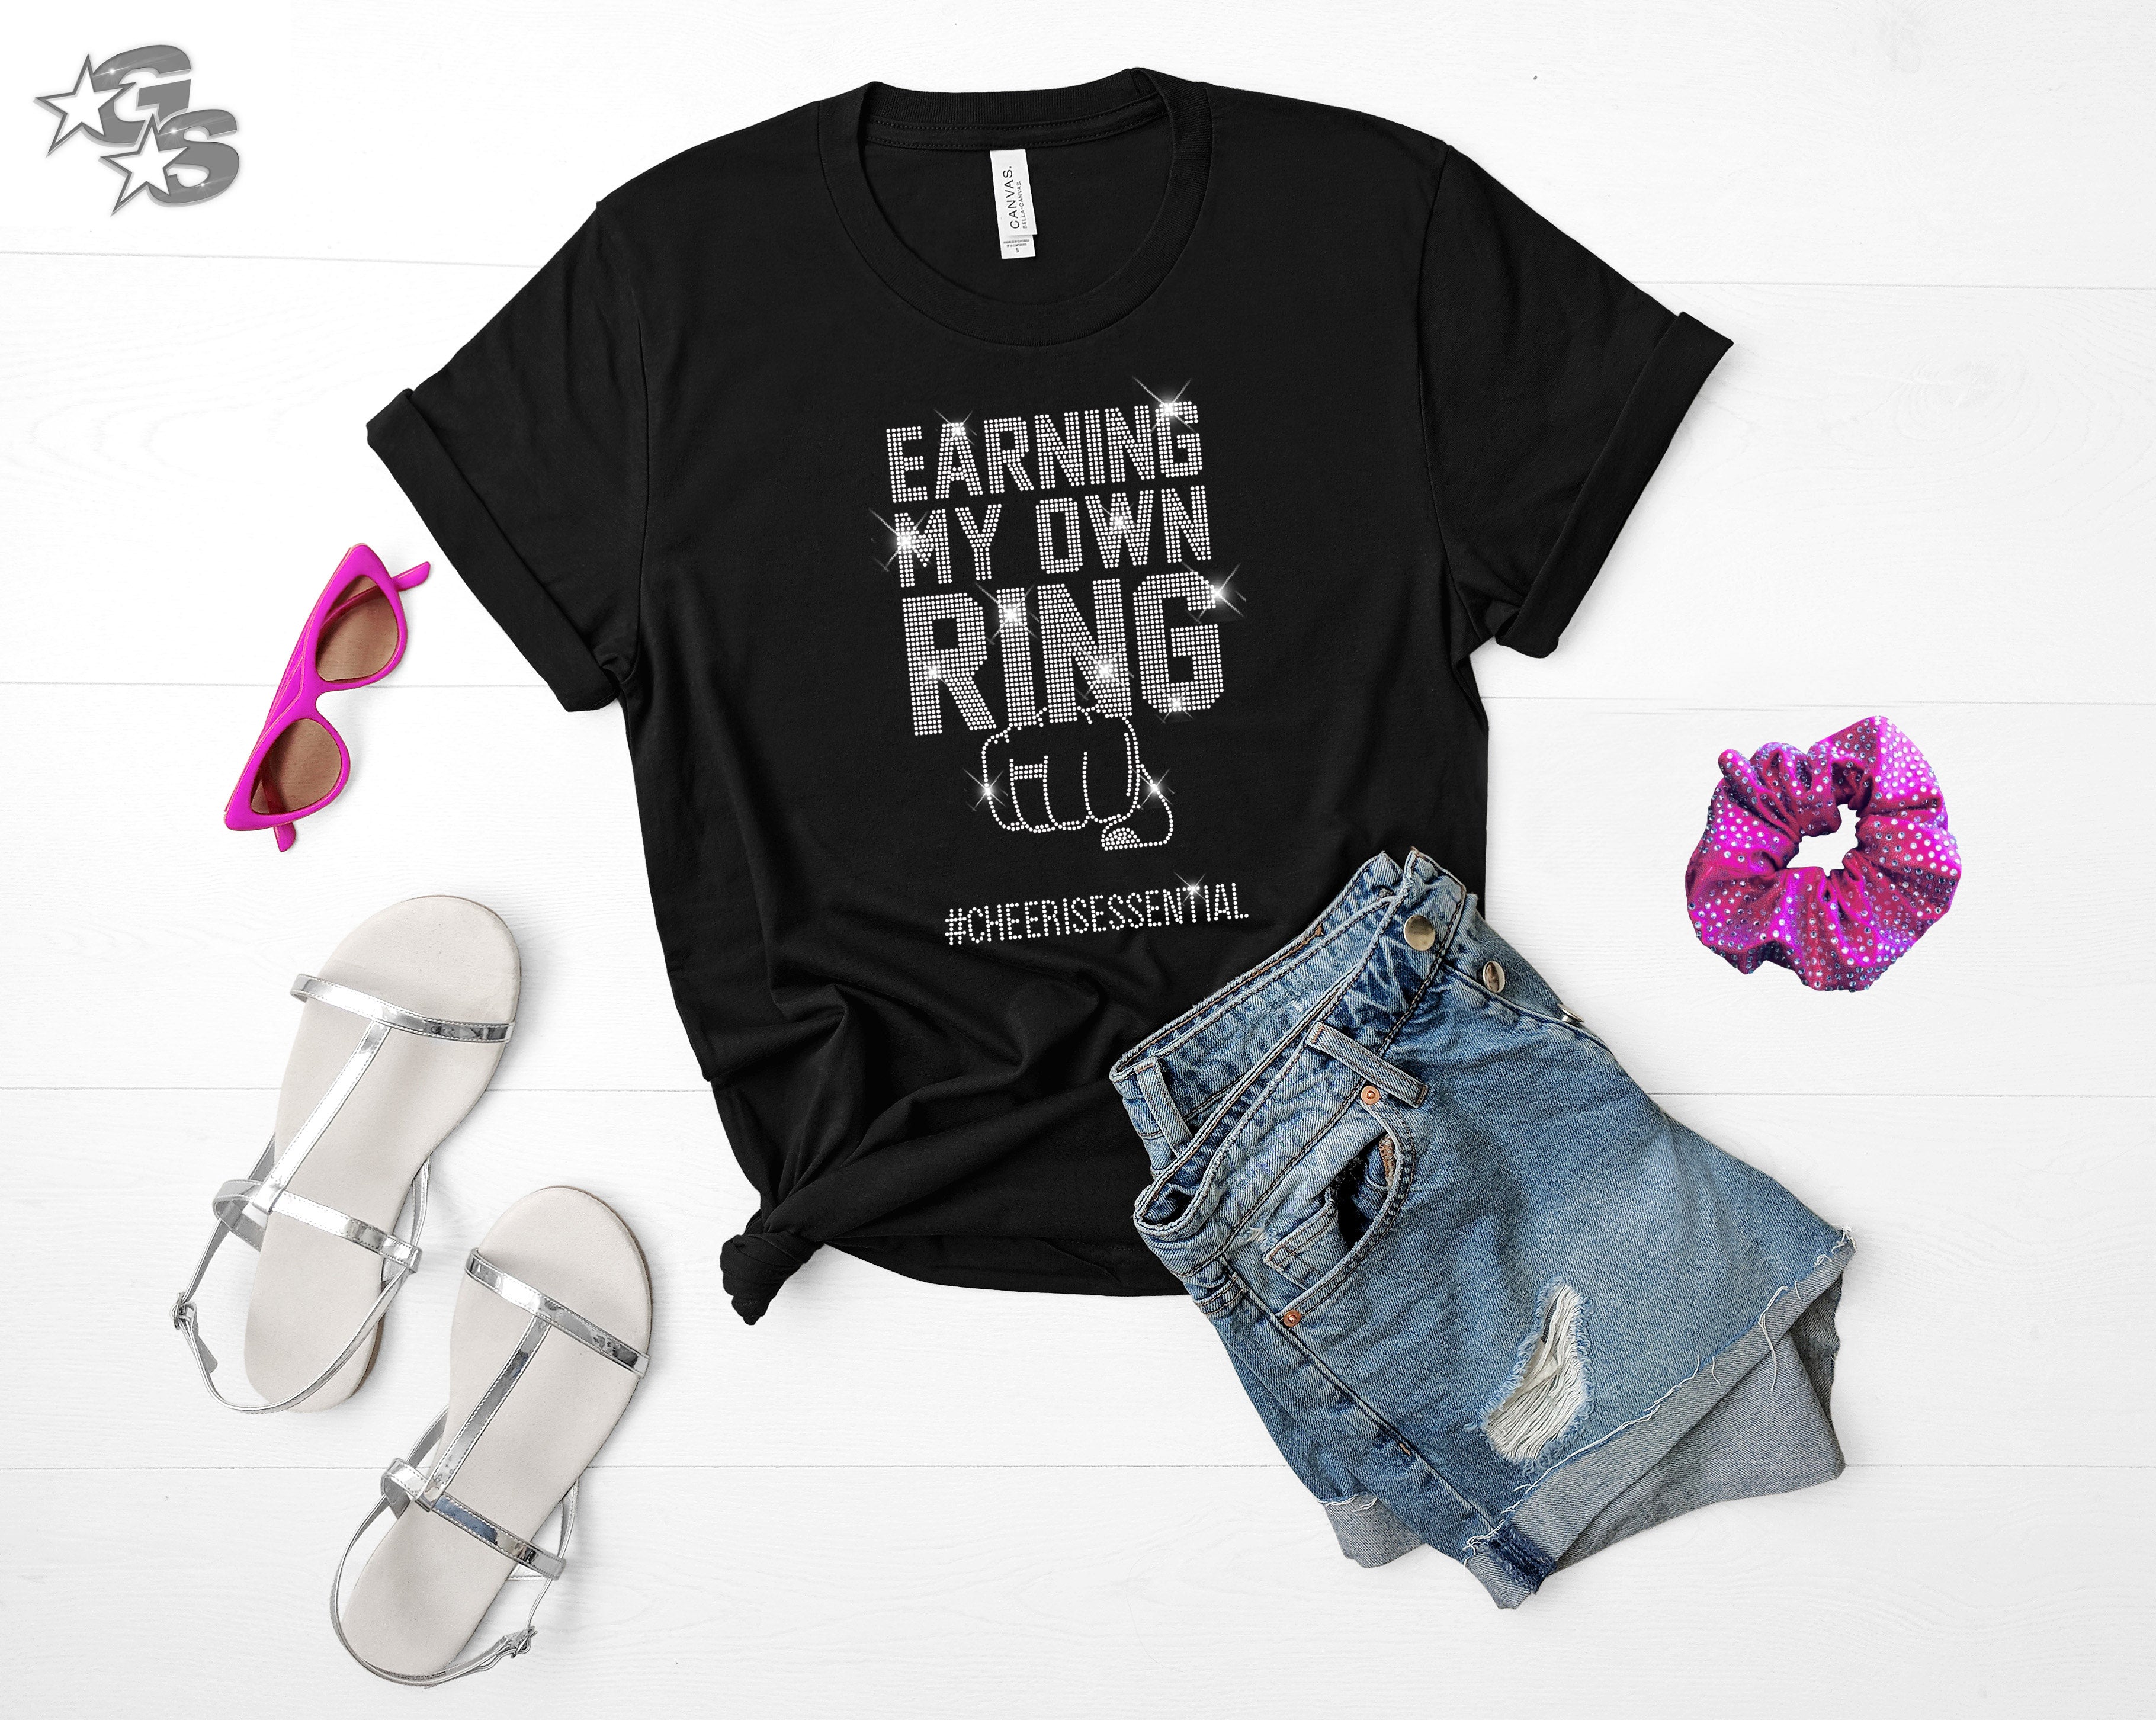 Earning My Own Ring Tee - Cheer, Dance, or Gymnastics (black) with Bling logo